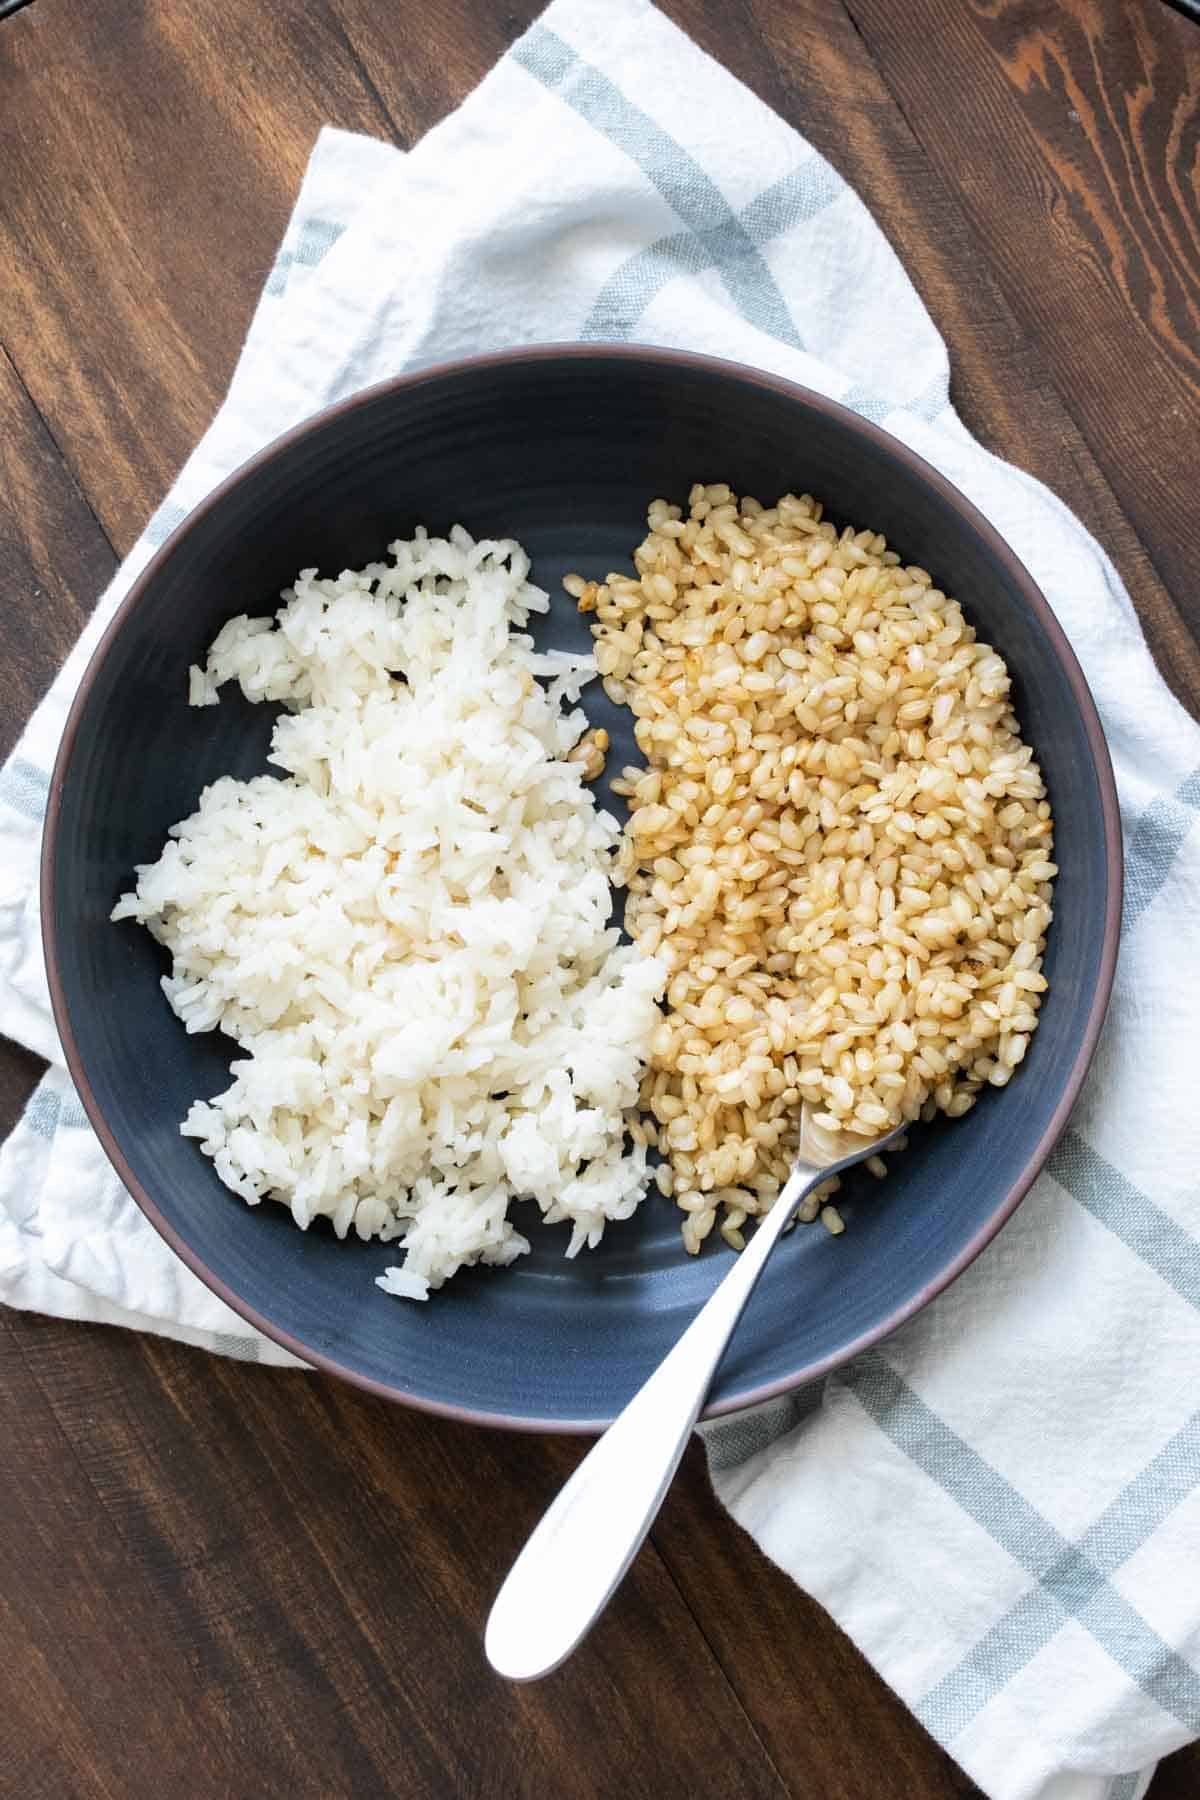 Black bowl with brown and white rice in it